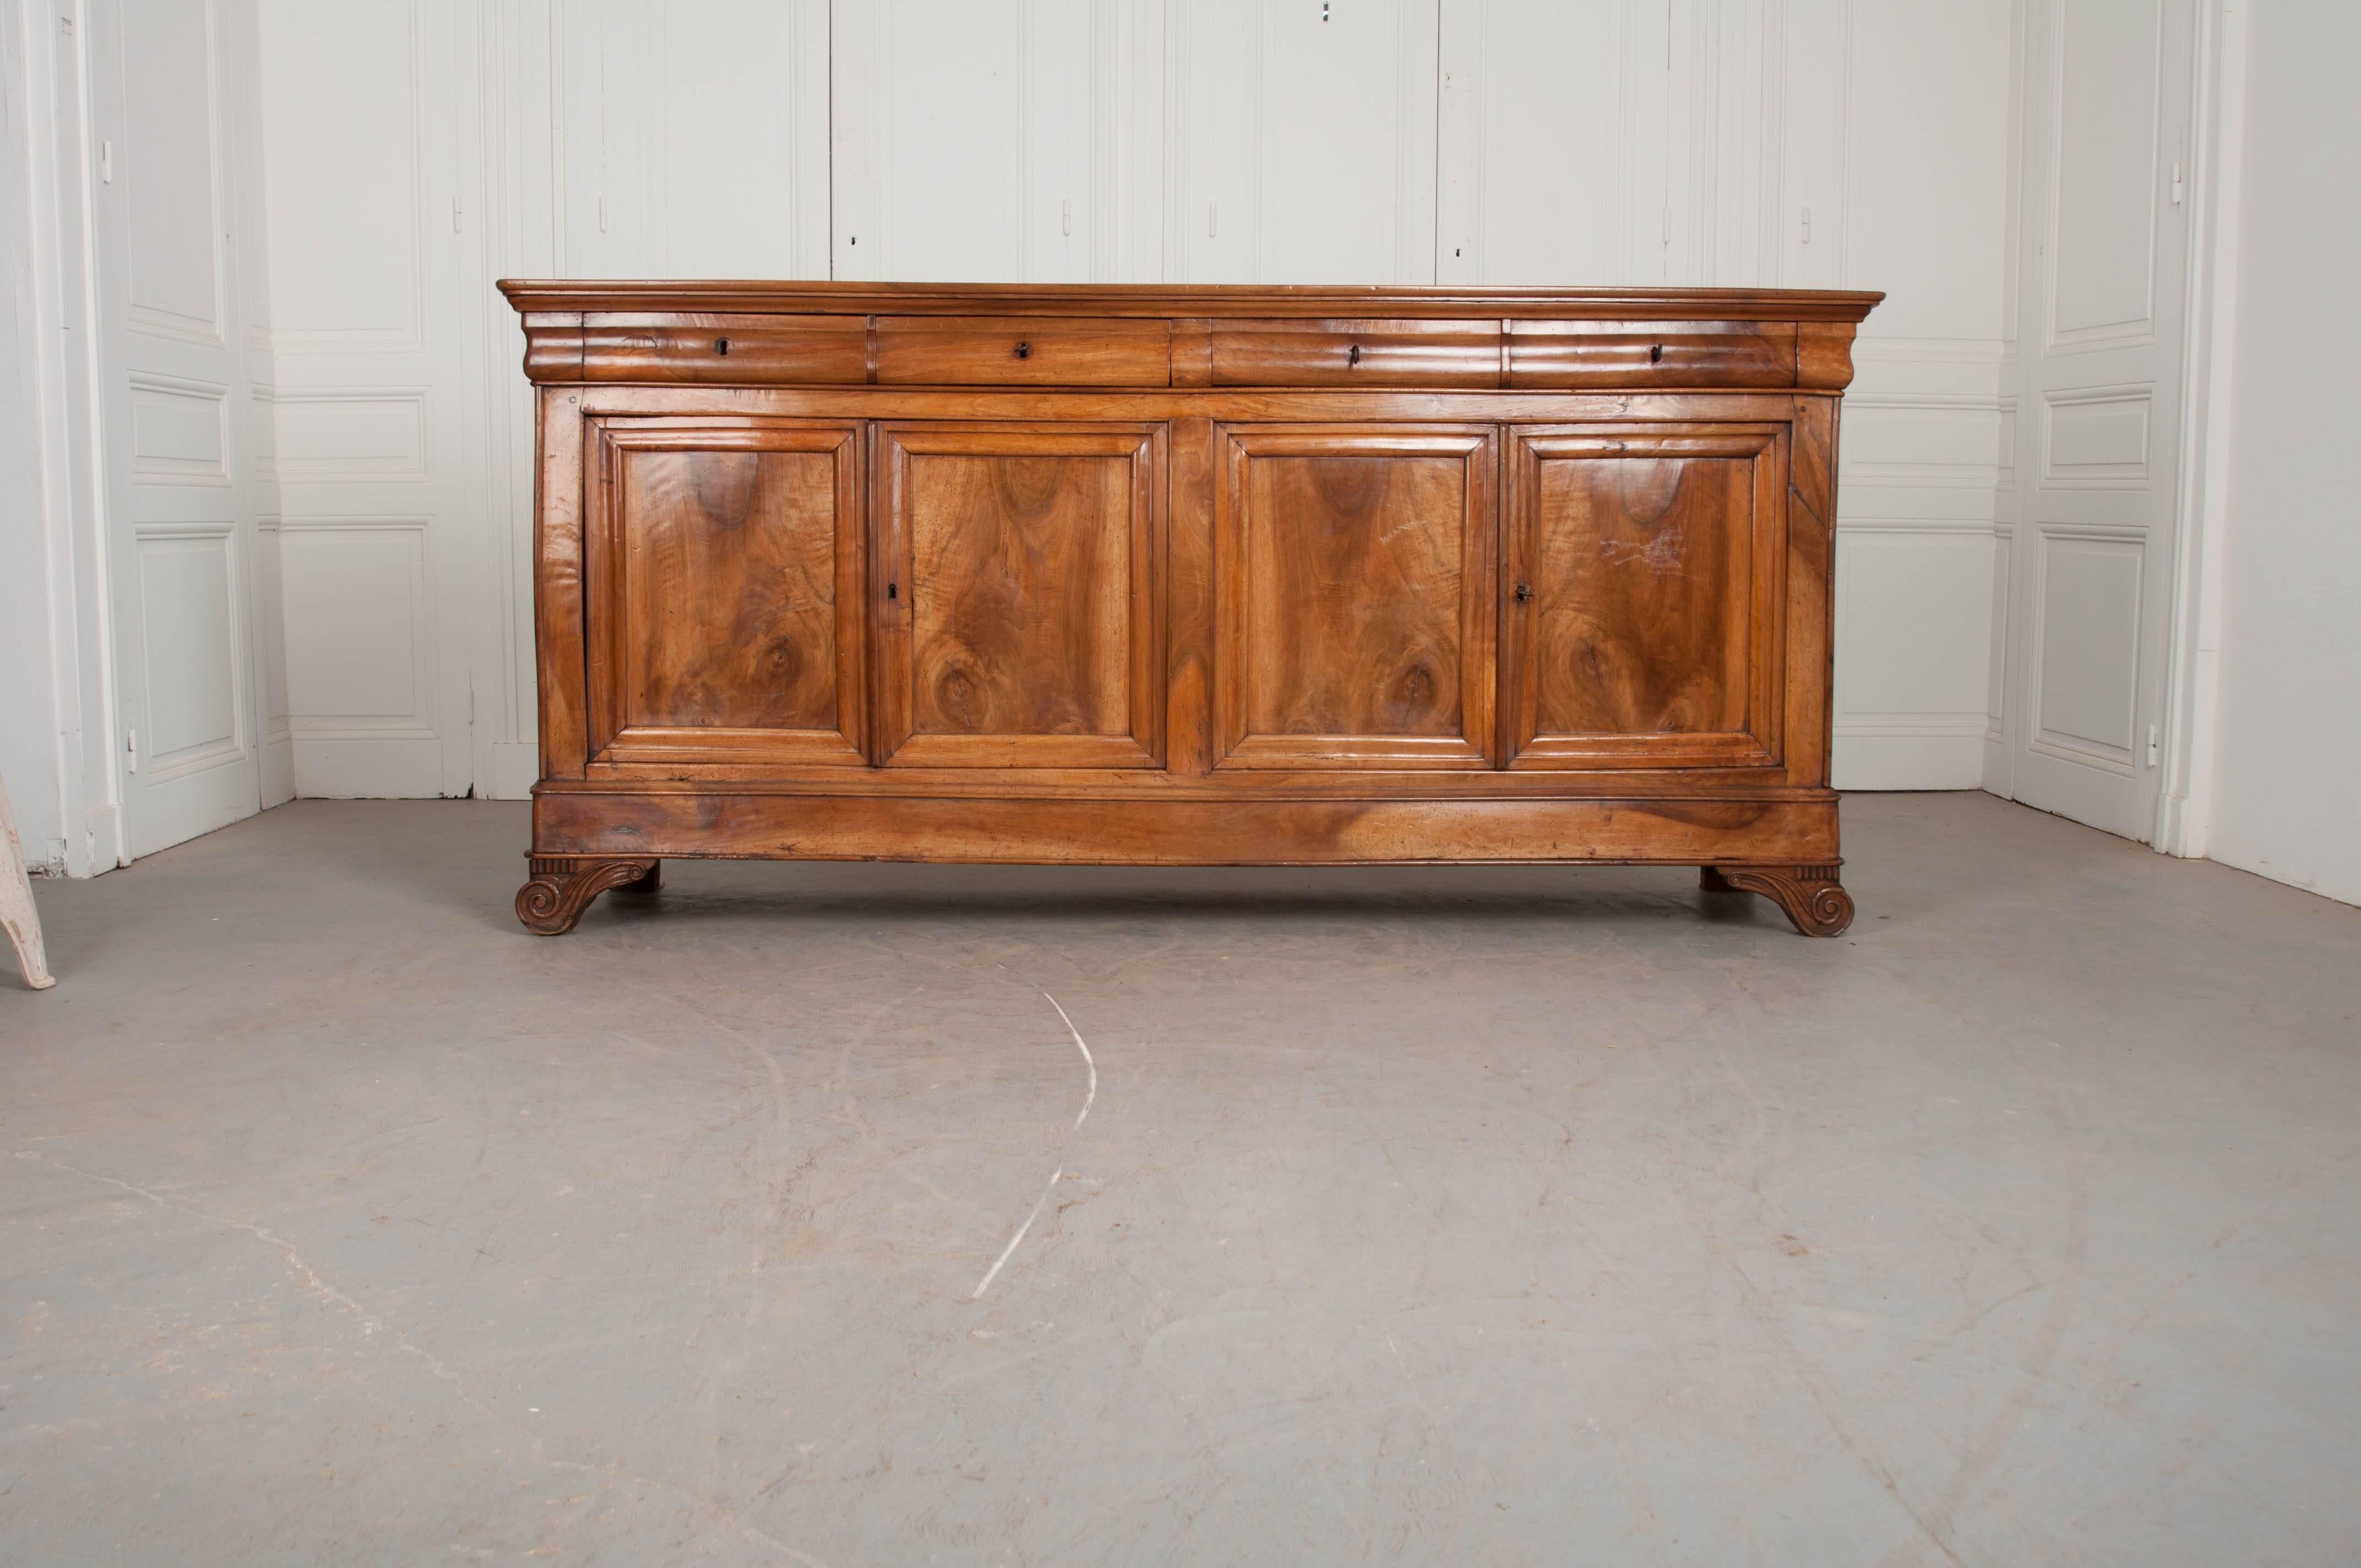 A remarkable solid walnut four-door Louis Philippe enfilade, from 19th century France. The antique case piece has four lockable drawers that are situated about its four lockable doors. This enfilade boasts incredibly beautiful walnut, with